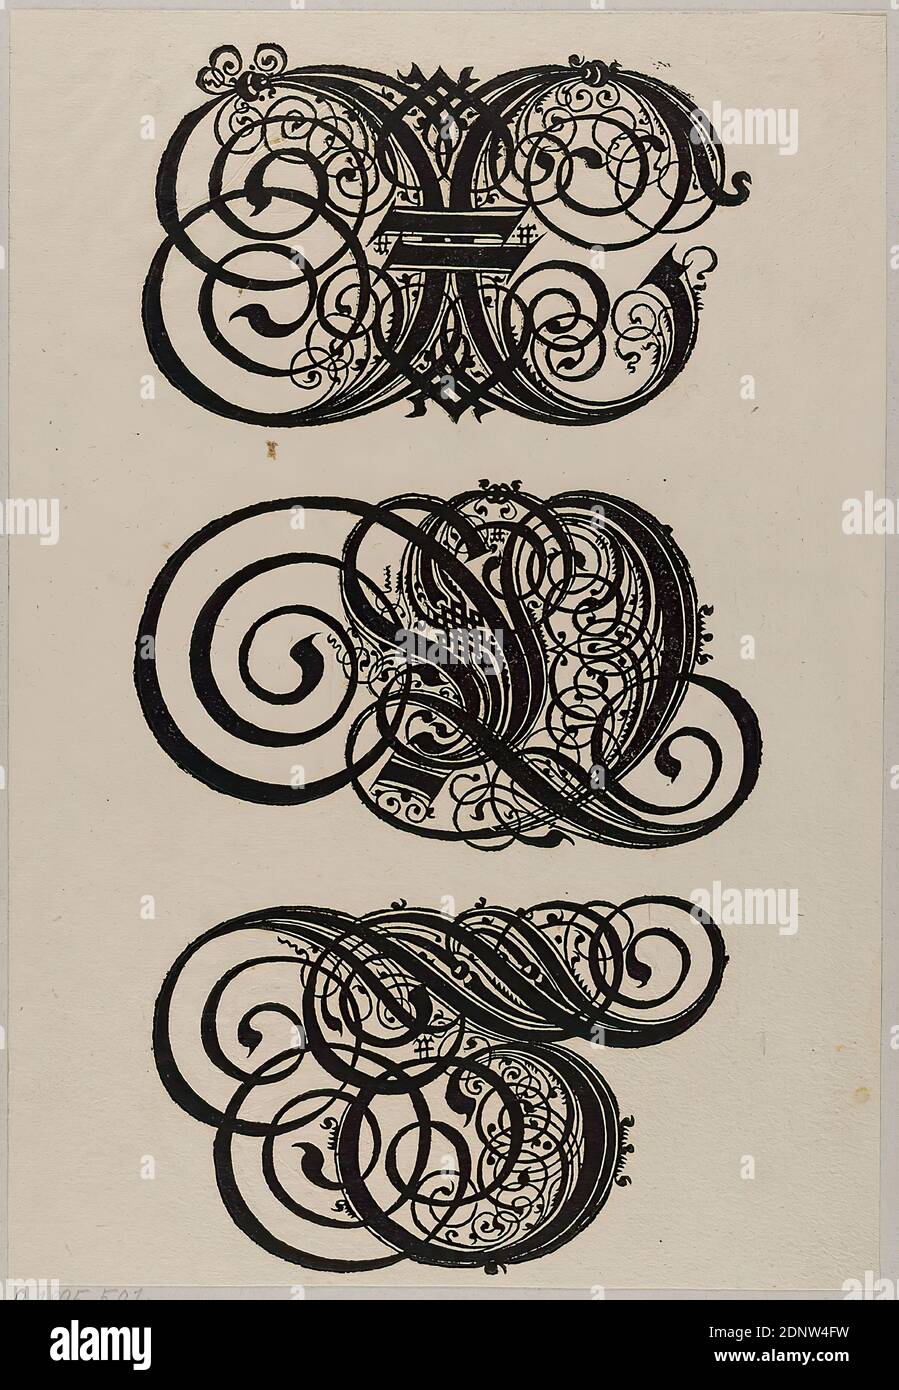 Conrad Bauer, Paulus Franck, Katharina Dietrich, alphabet (ornamental letters X, Y, Z), paper, woodcut, sheet size: height: 28,20 cm; width: 19,40 cm, unmarked, prints, printed matter, letters, alphabet, writing, One of eight sheets with three ornamental letters of the alphabet from each: treasury, all kinds of capitals Latin and German all Cantzleyen from neüen in Druckh thus finished. By Paulum Francken of Gfres from the Voigtlandt Burger von Memmingen, Printed at Nürmberg, by Katharina Dieterichin, In transfer Conrad Bauern 1601 Stock Photo